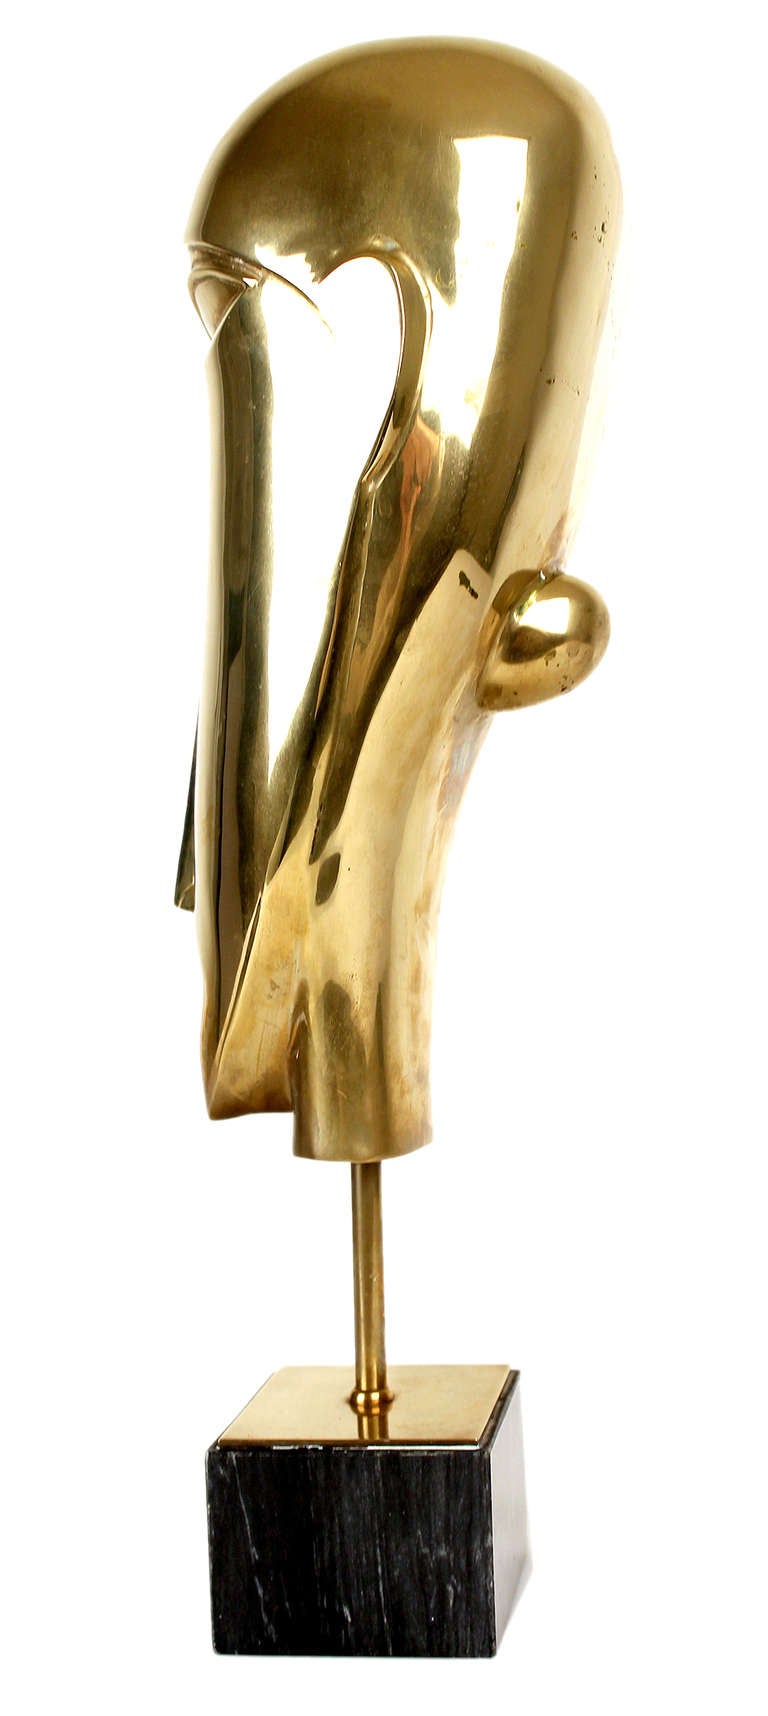 Mid-20th Century Large Art Deco Brass Woman Sculpture, Tribal Inspired Style, 1930s Modernist  For Sale